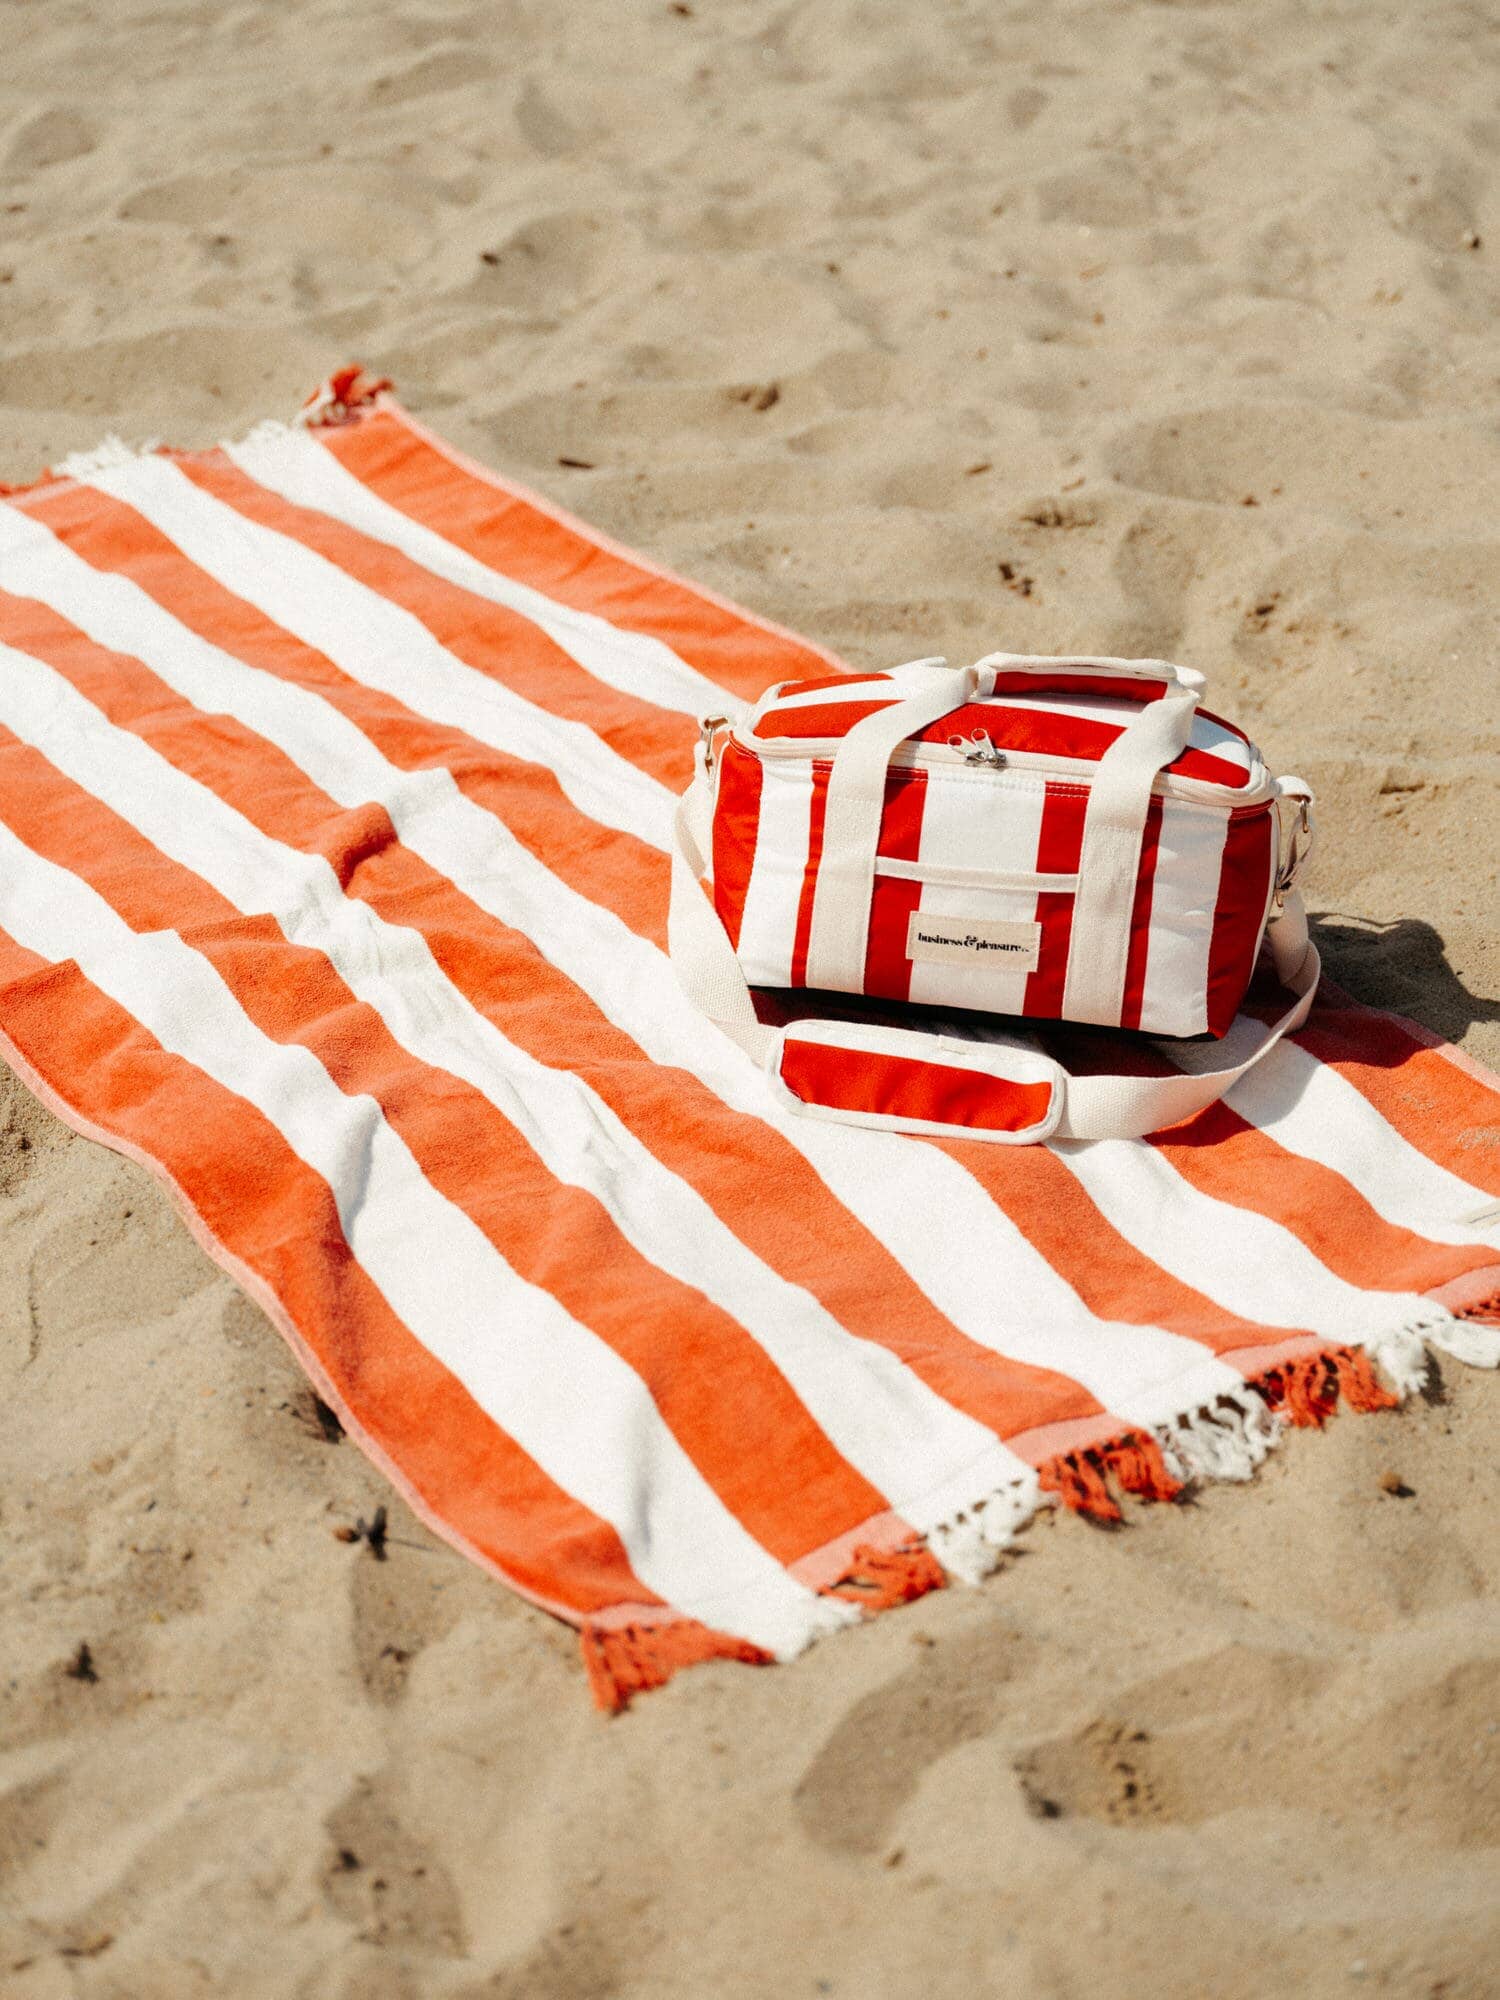 Le sirenuse holiday cooler and towel on the sand